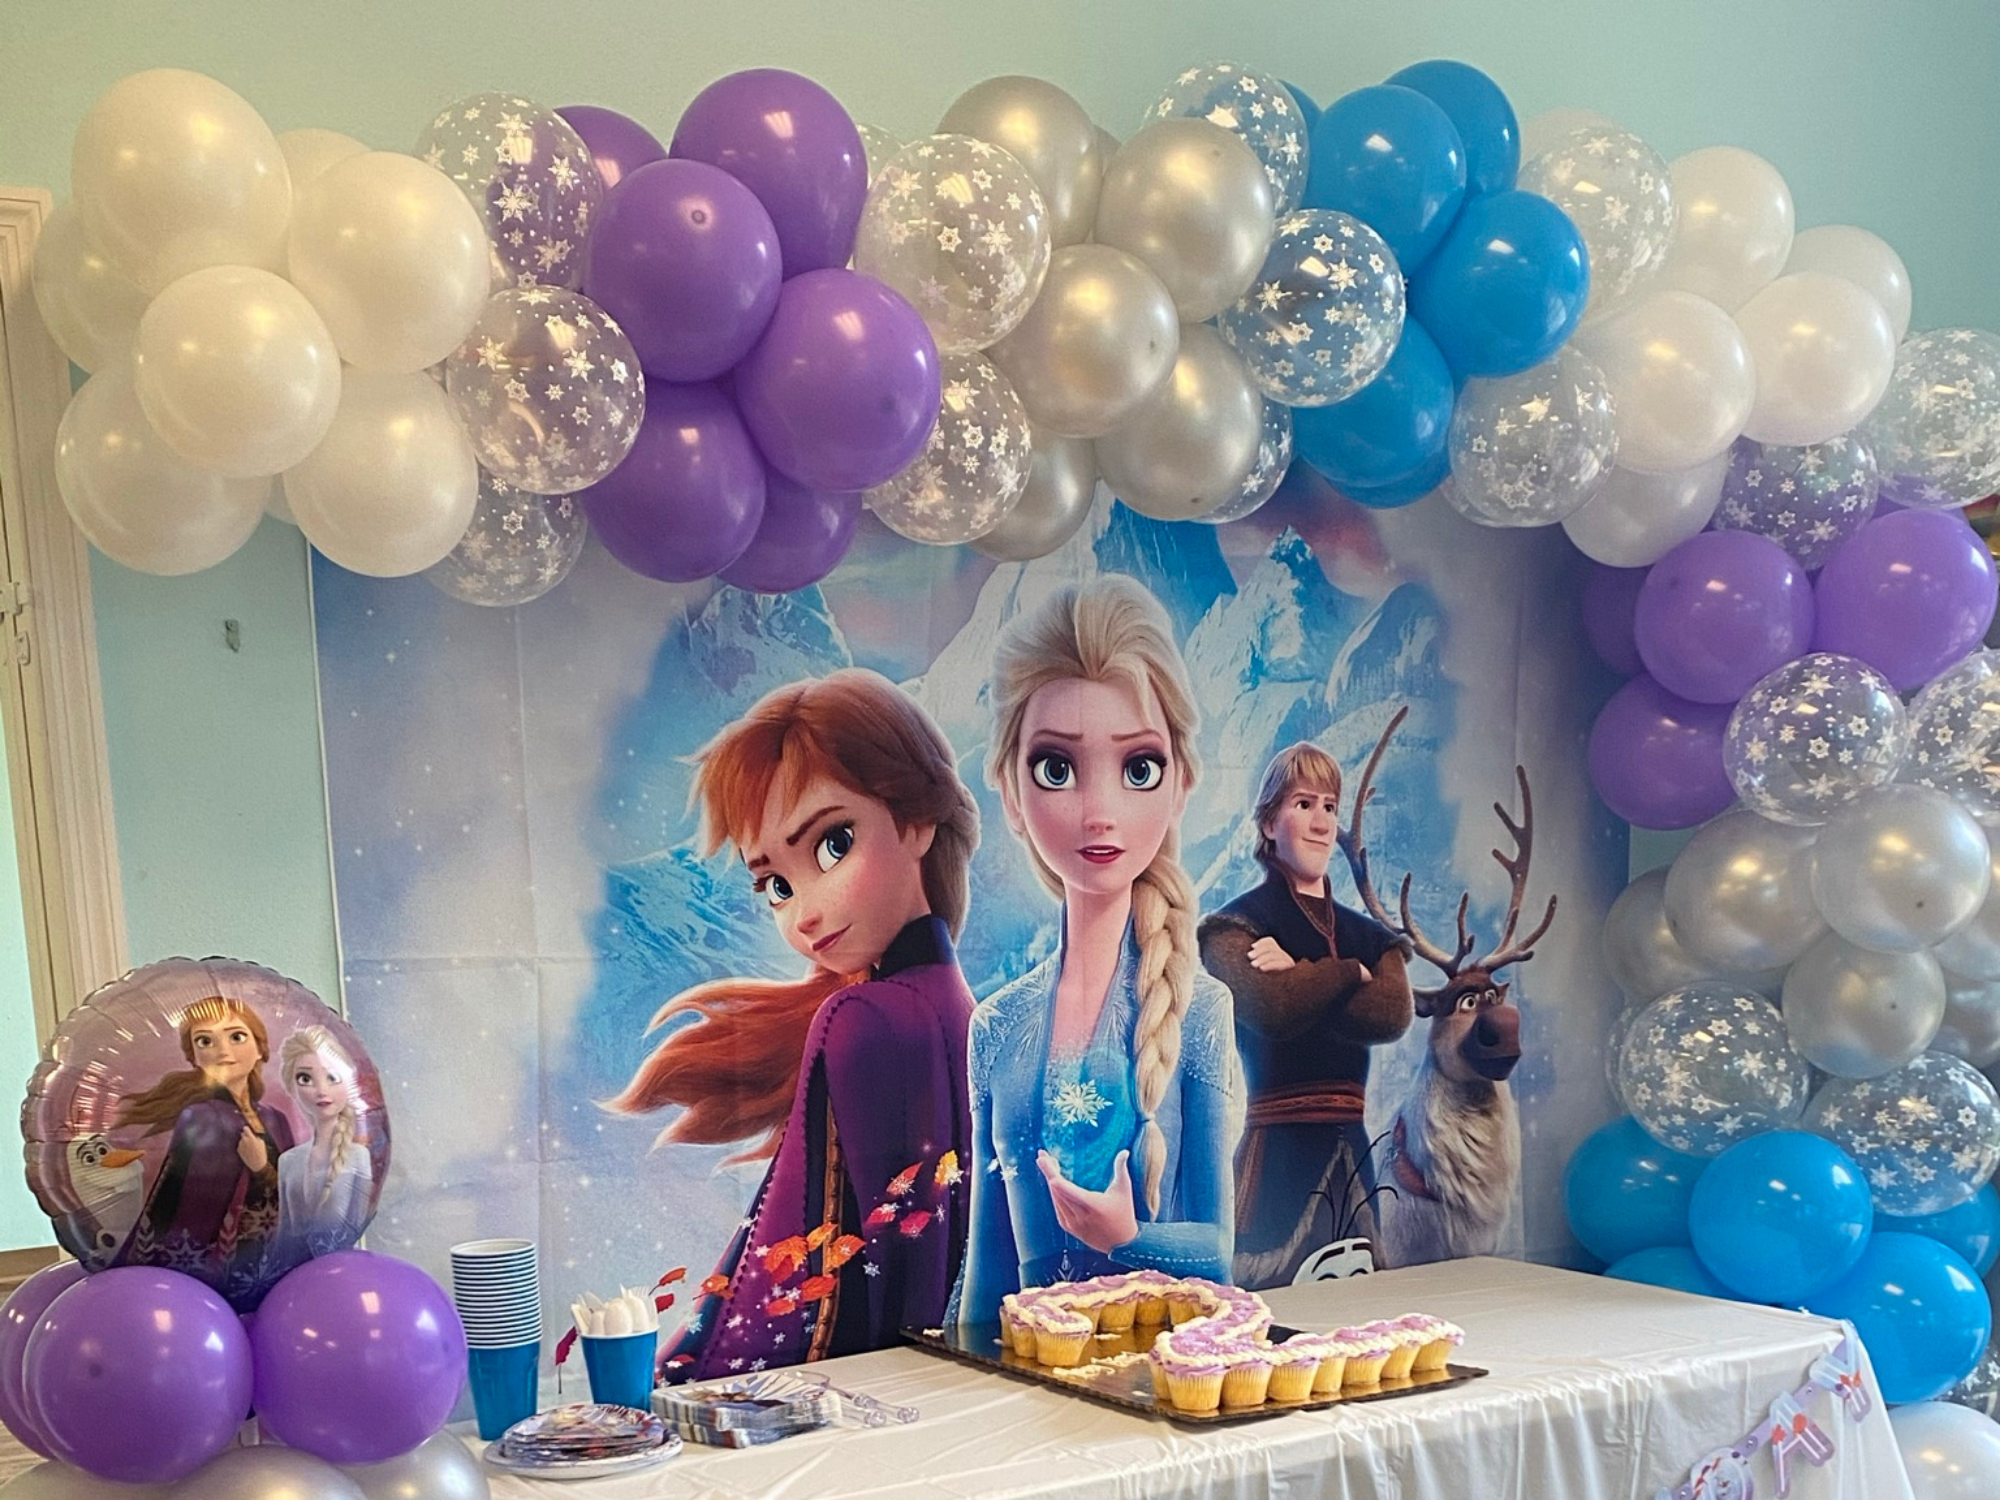 We had a wonderful 2nd Birthday party for my daughter....Everything was perfect. They handled all the details... All we had to do was show up and have fun!